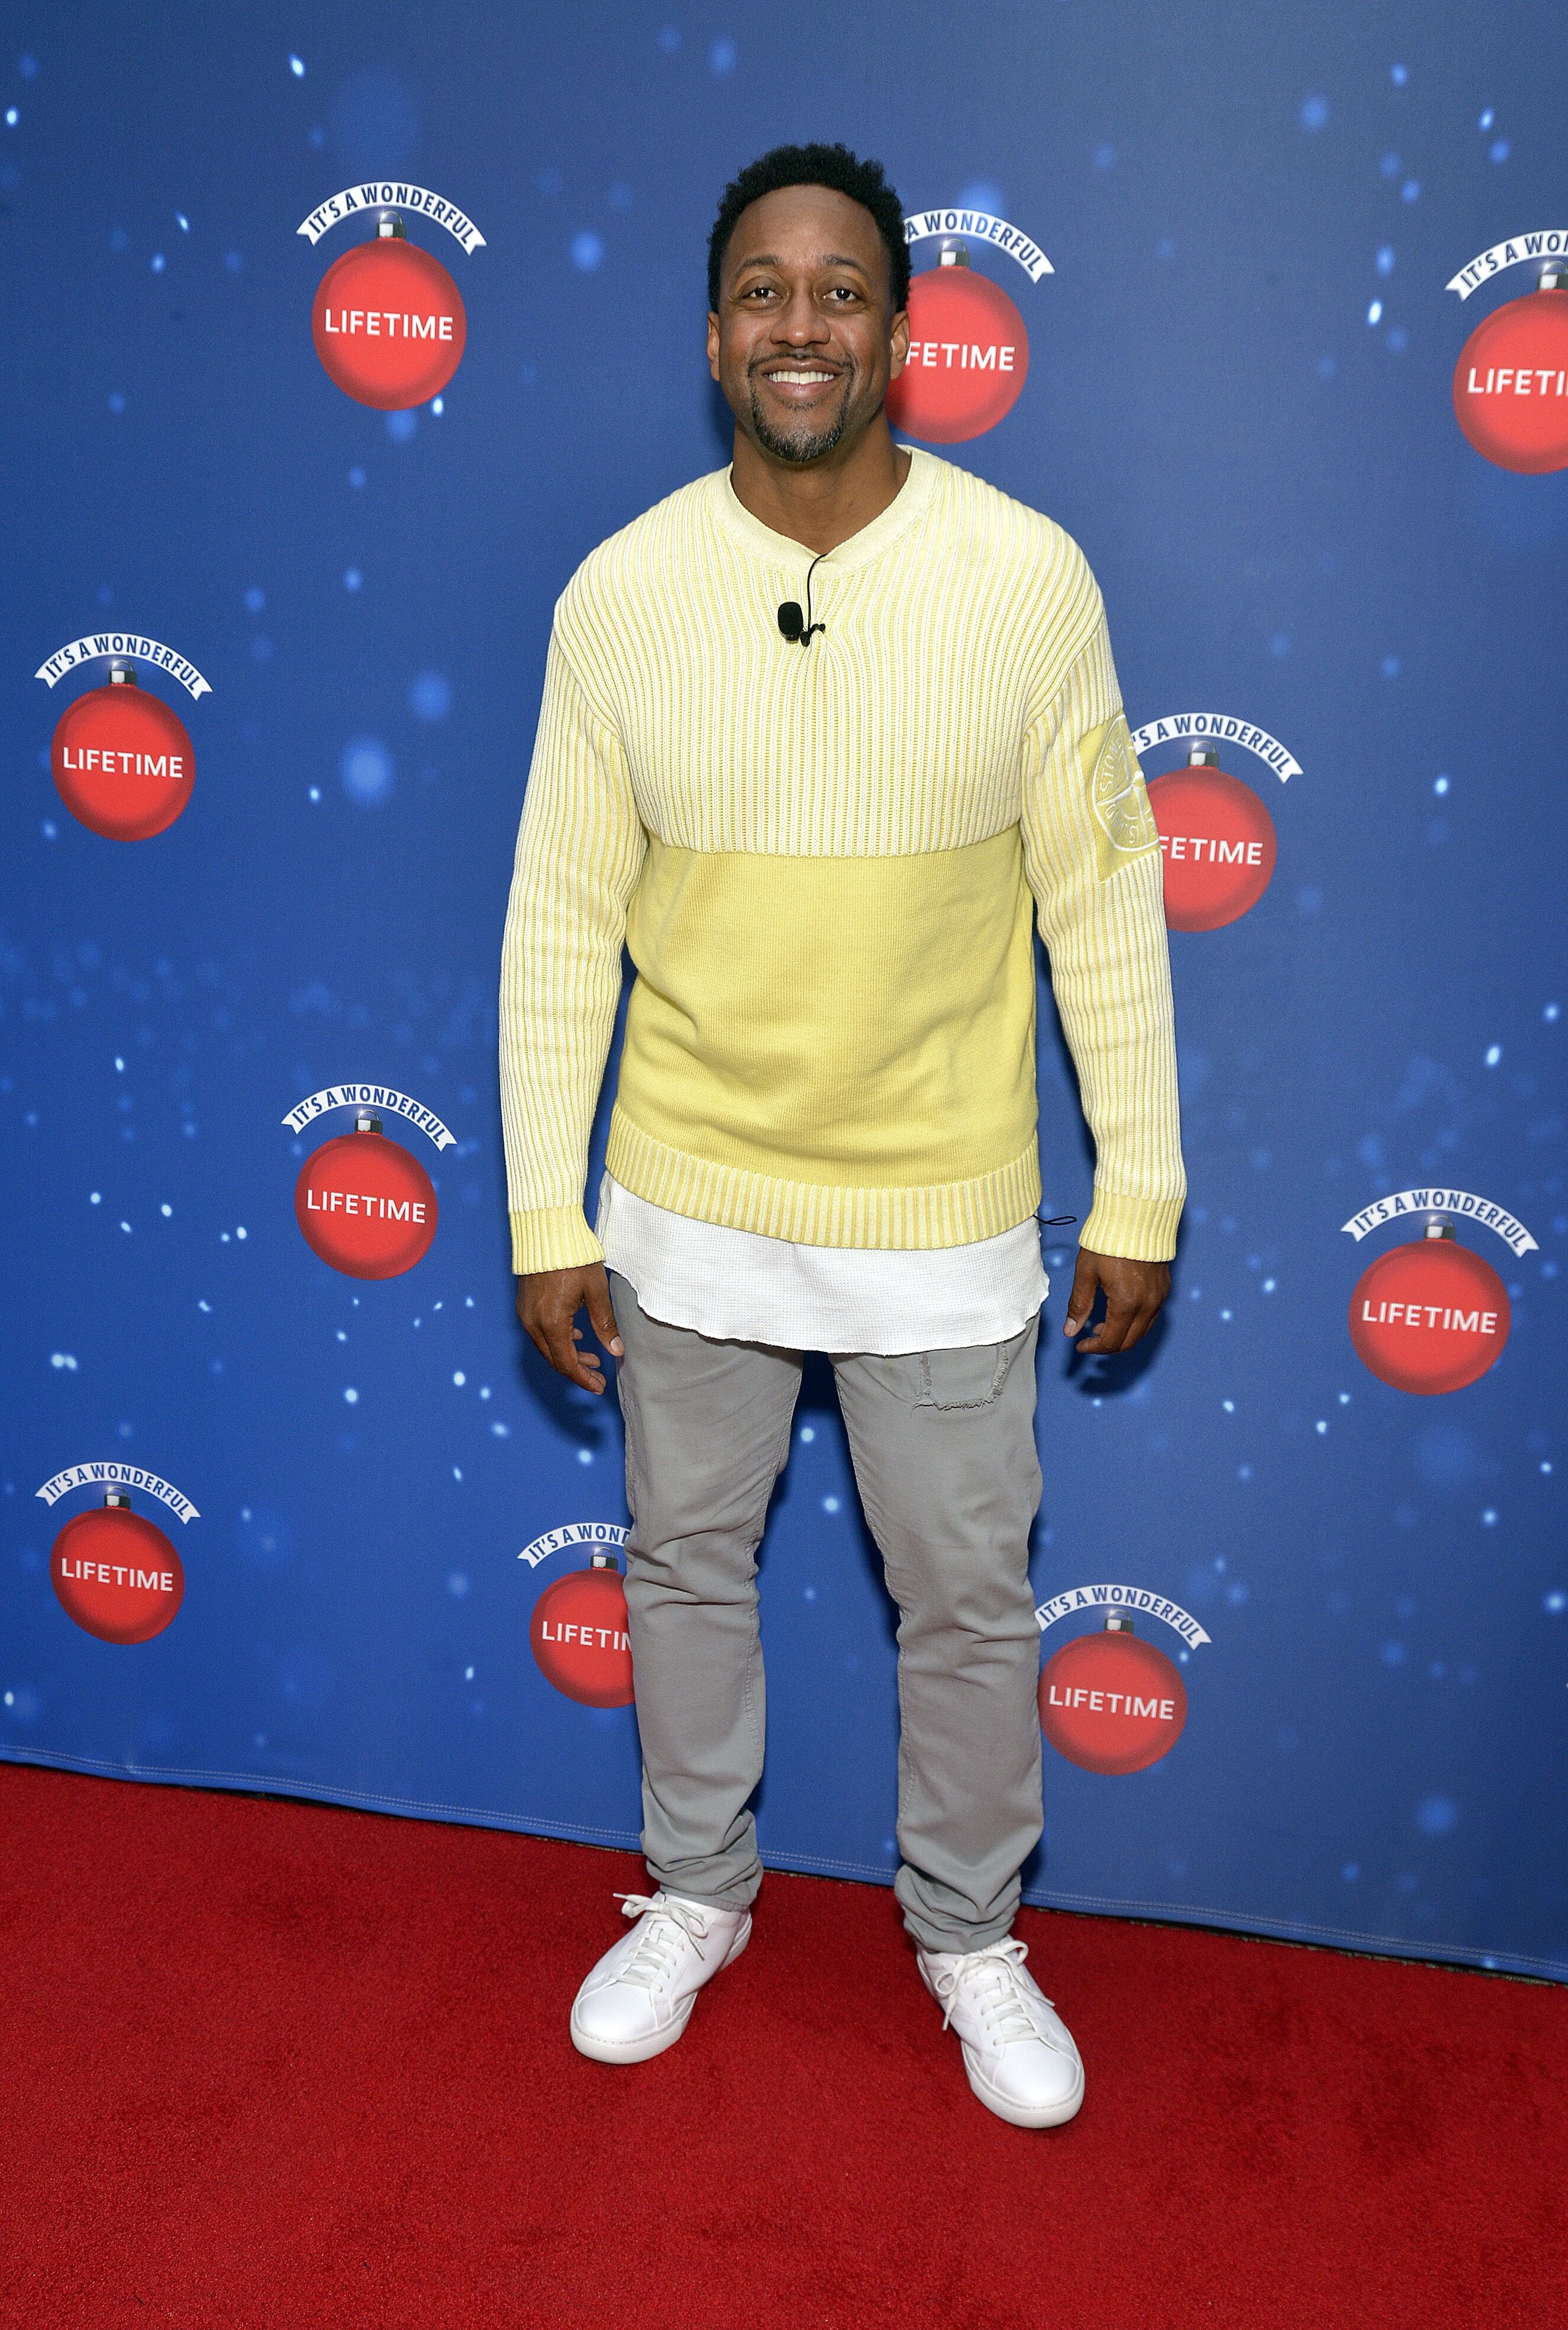 Jaleel White at a Lifetime Christmas kick-off event in November 2019.  | Photo: Getty Images